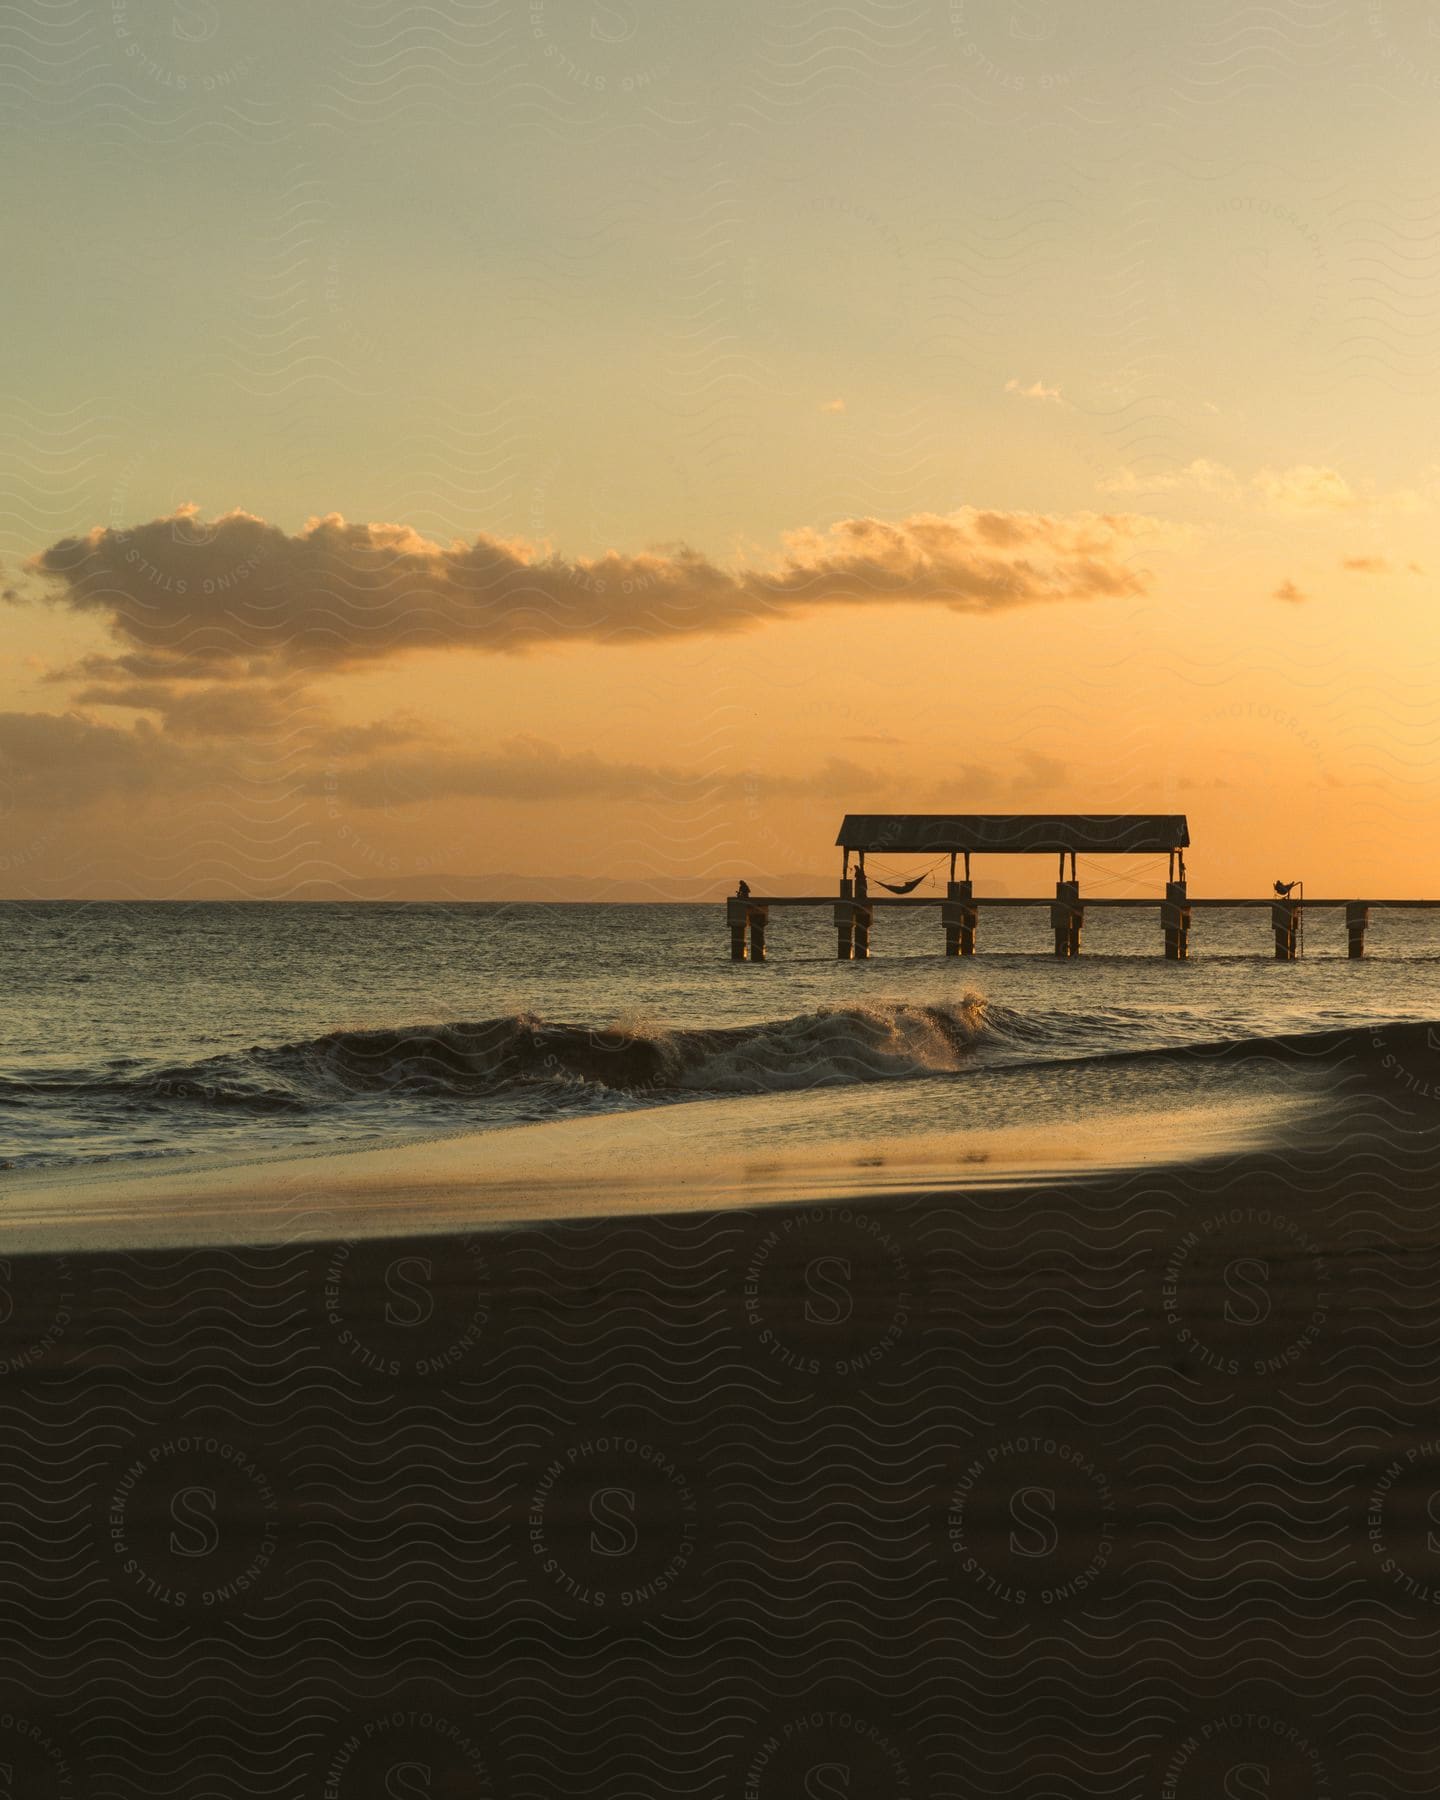 Waves roll into shore under the pier and over the beach at sunset